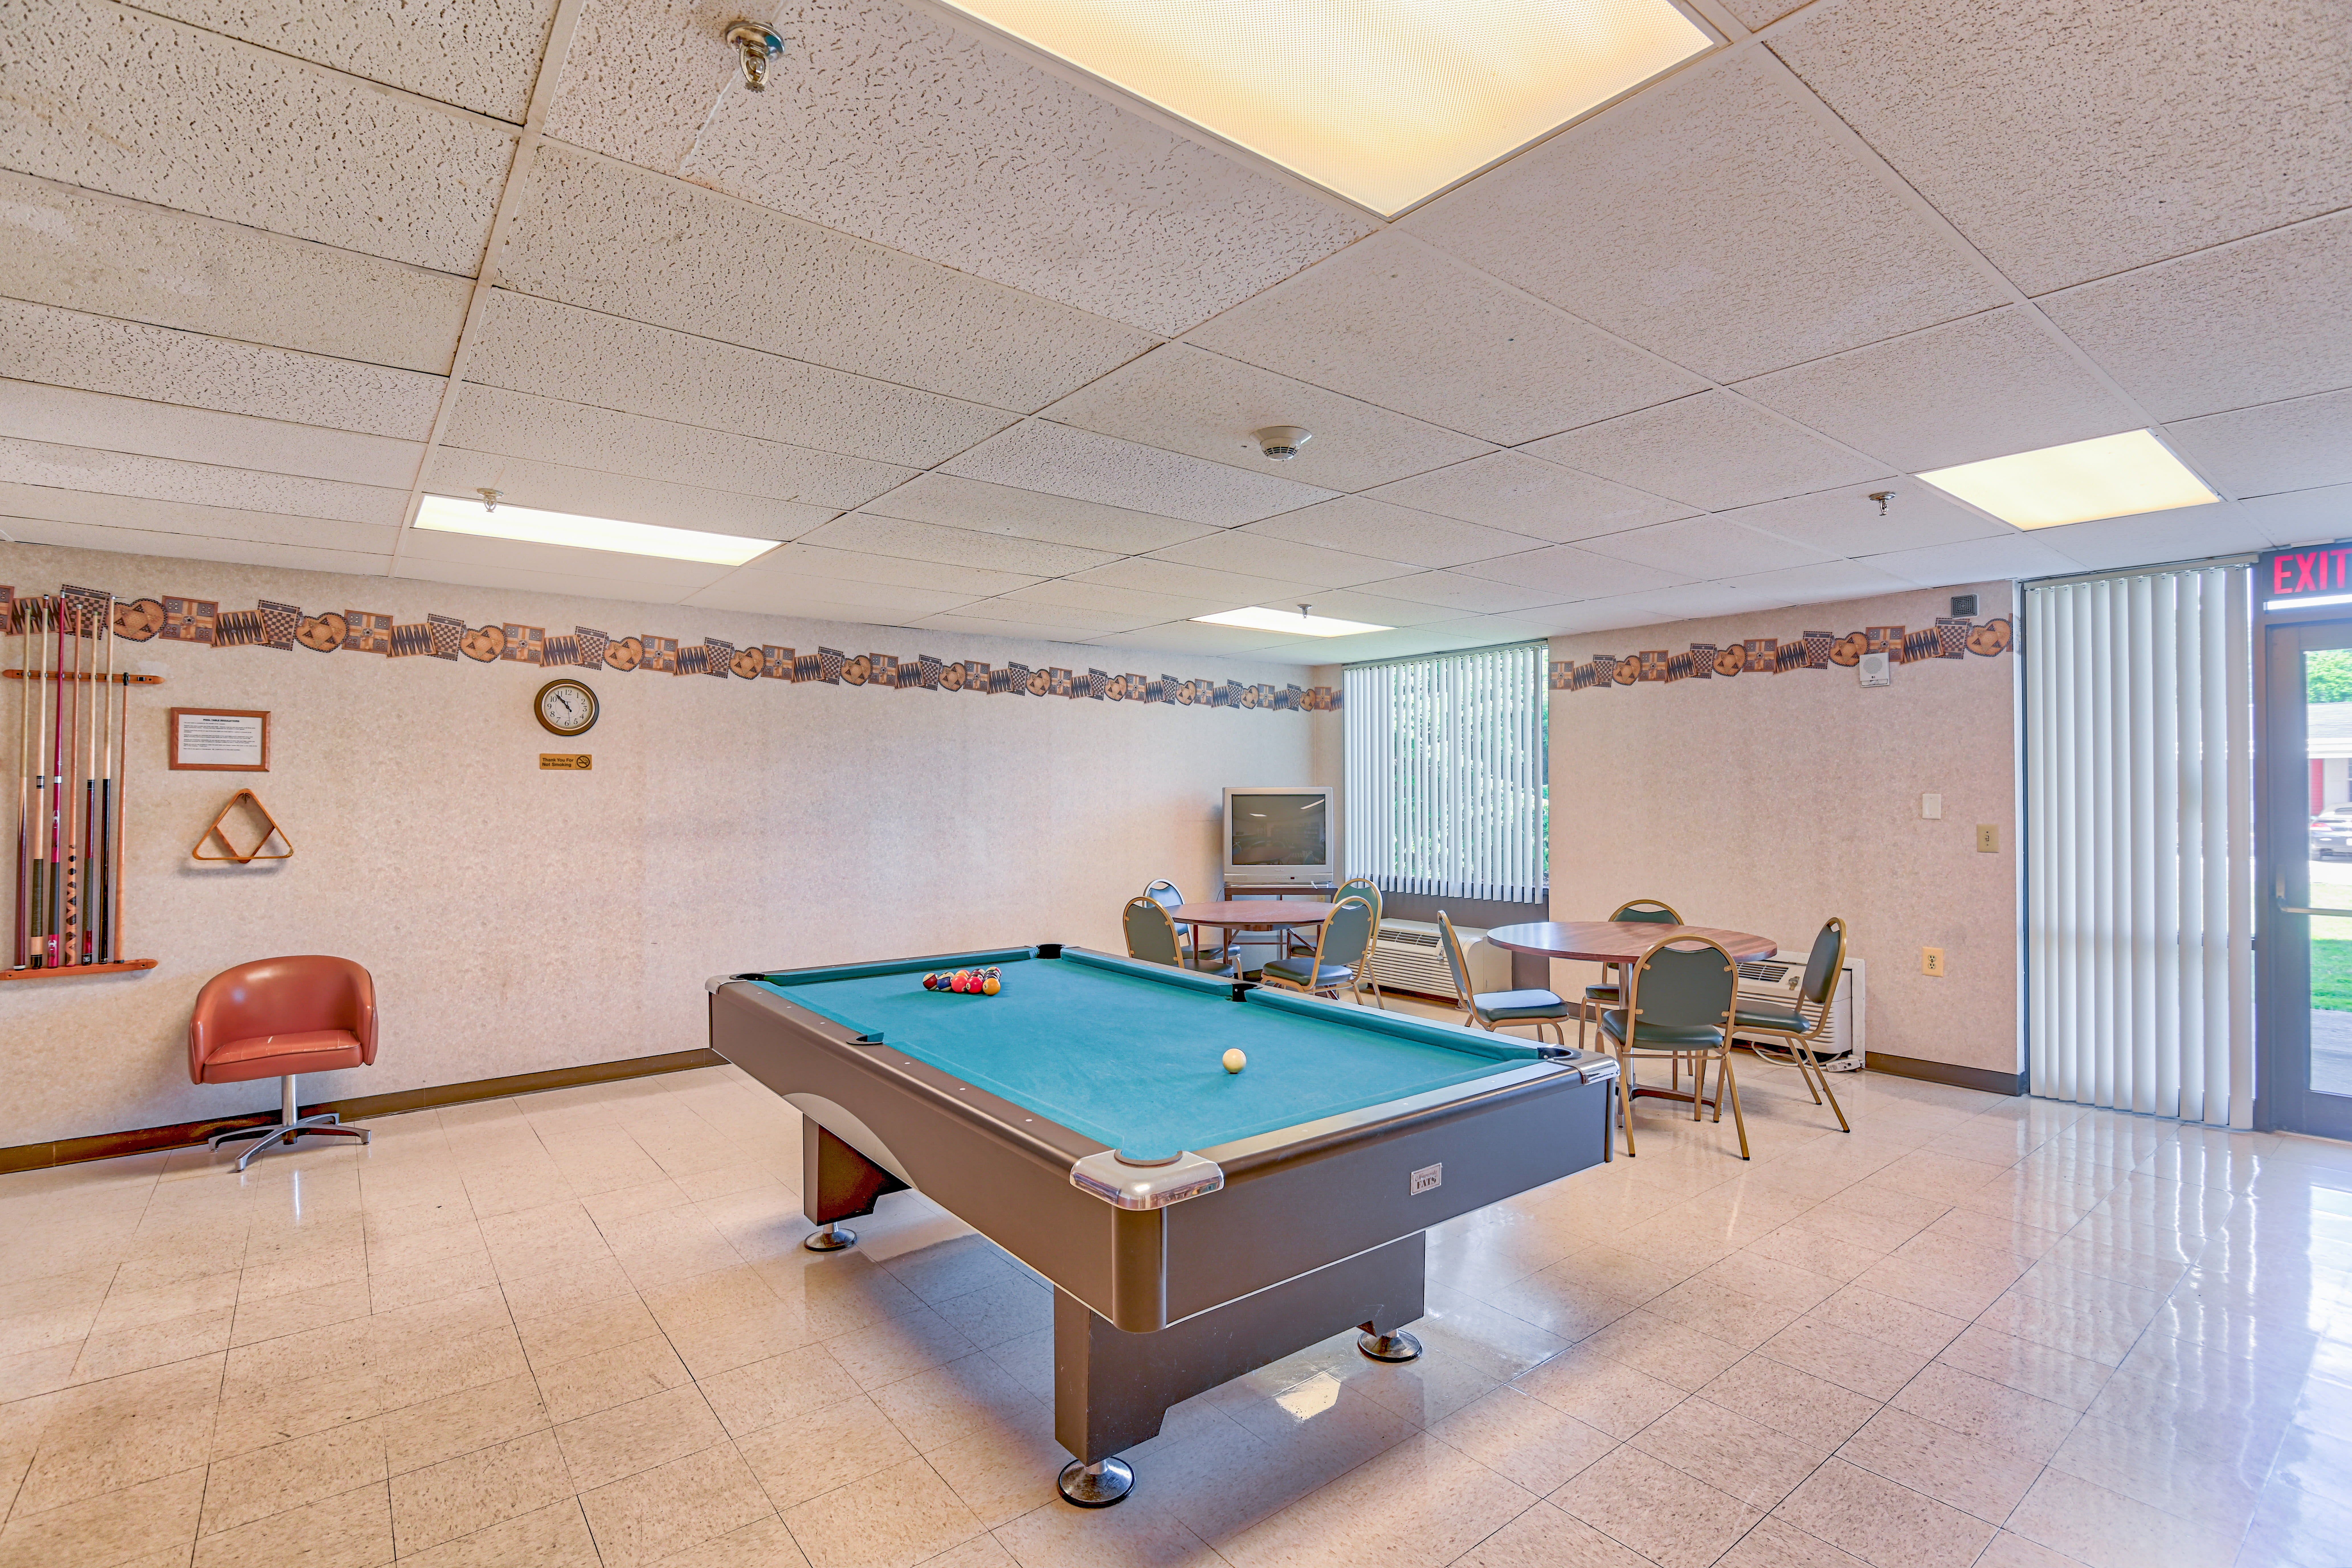 Community room with a pool table at Riverside Towers in Coshocton, Ohio